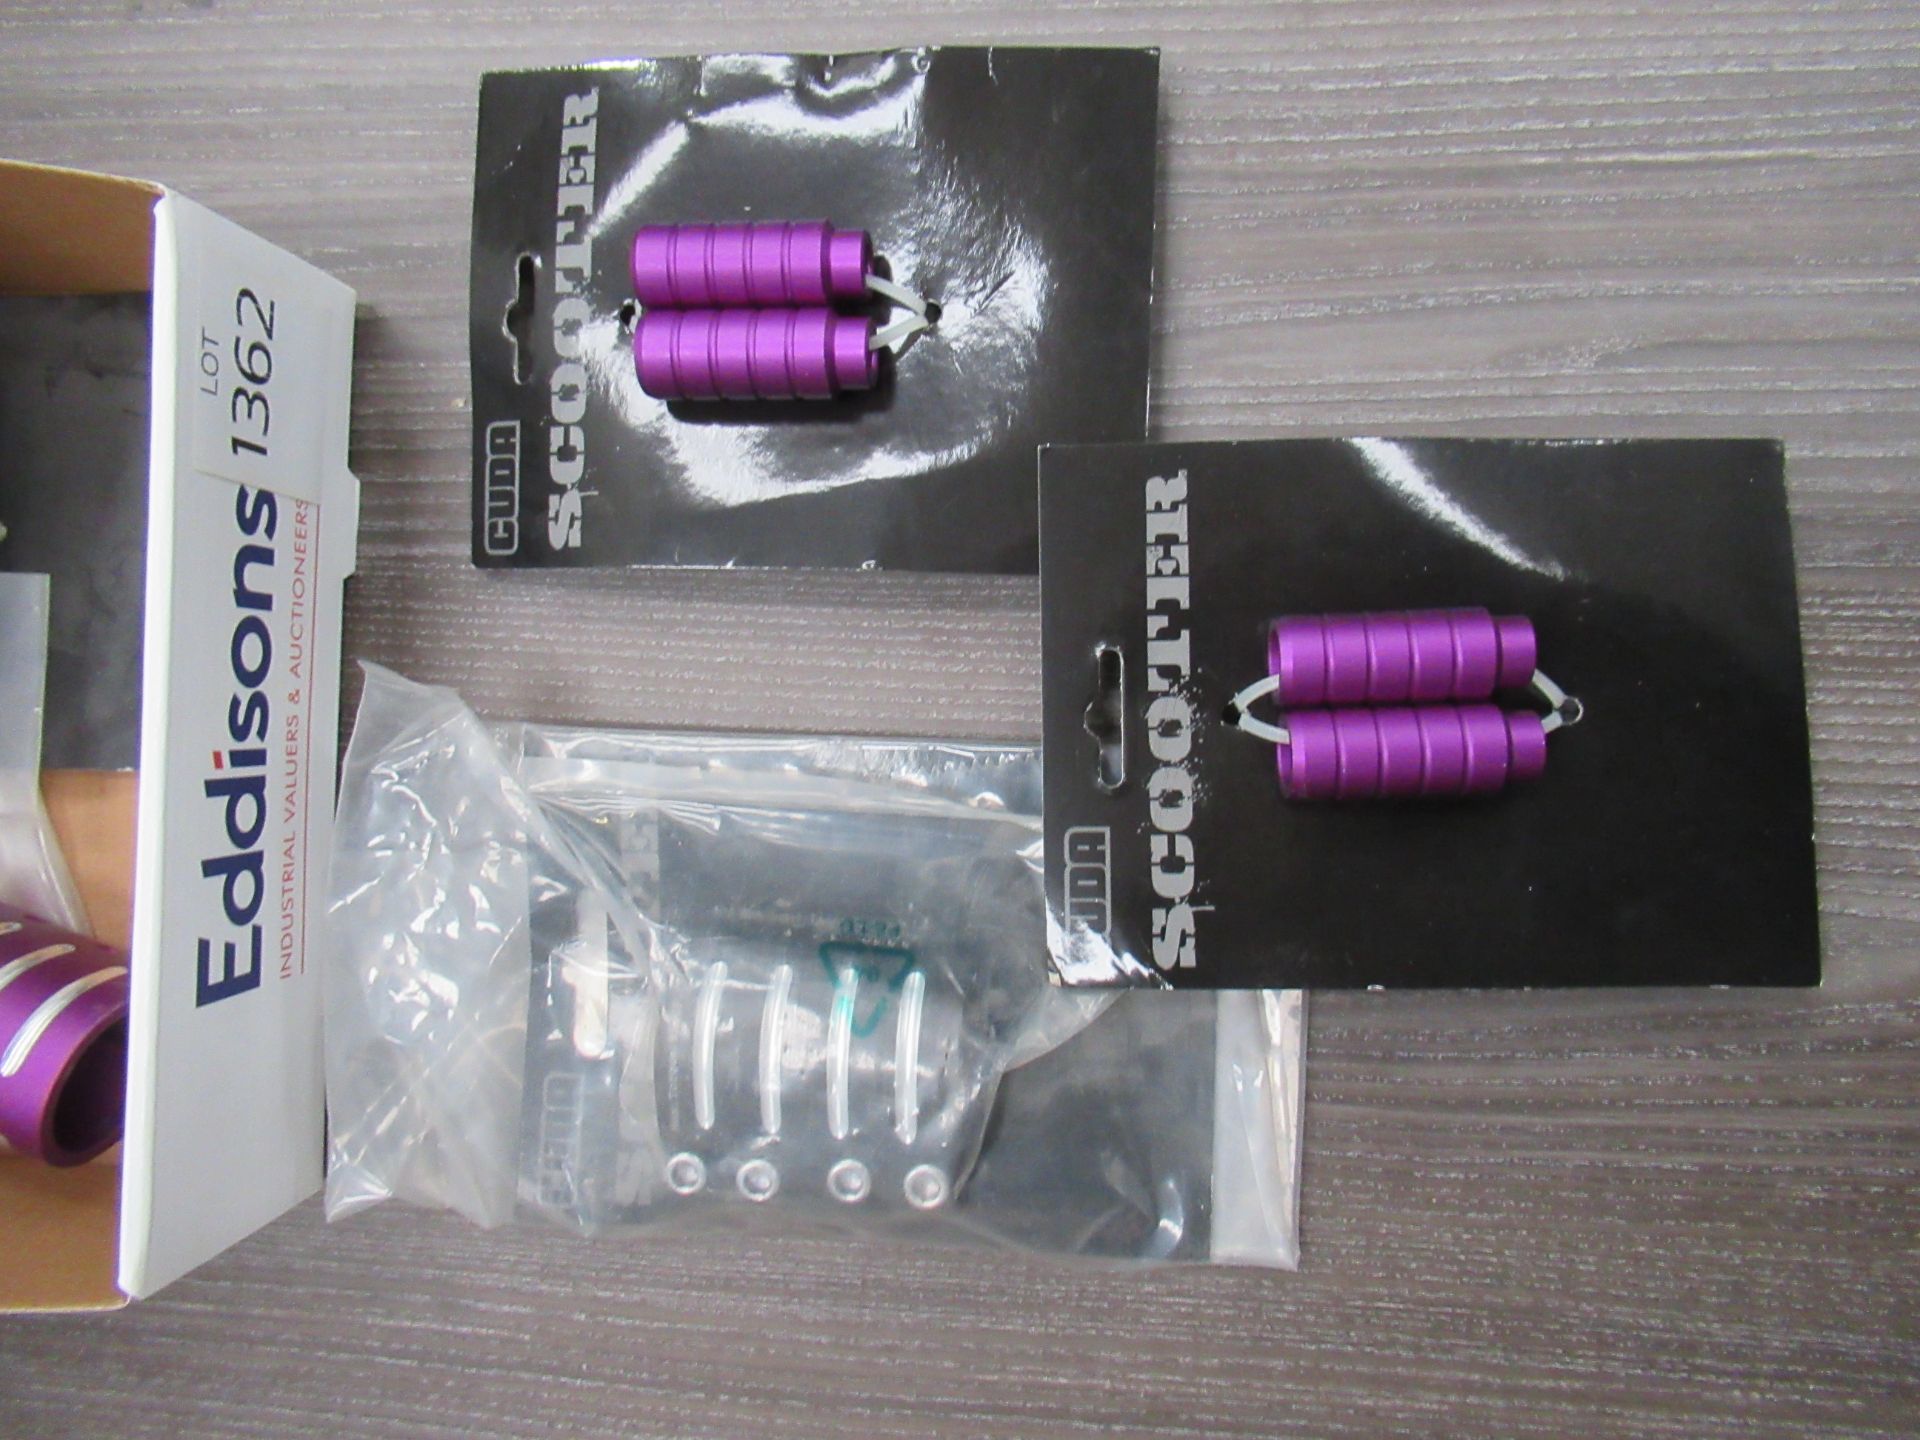 Box of Cuda Scooter's Stunt pegs and CNC clamps - Purple and Black - Image 3 of 3